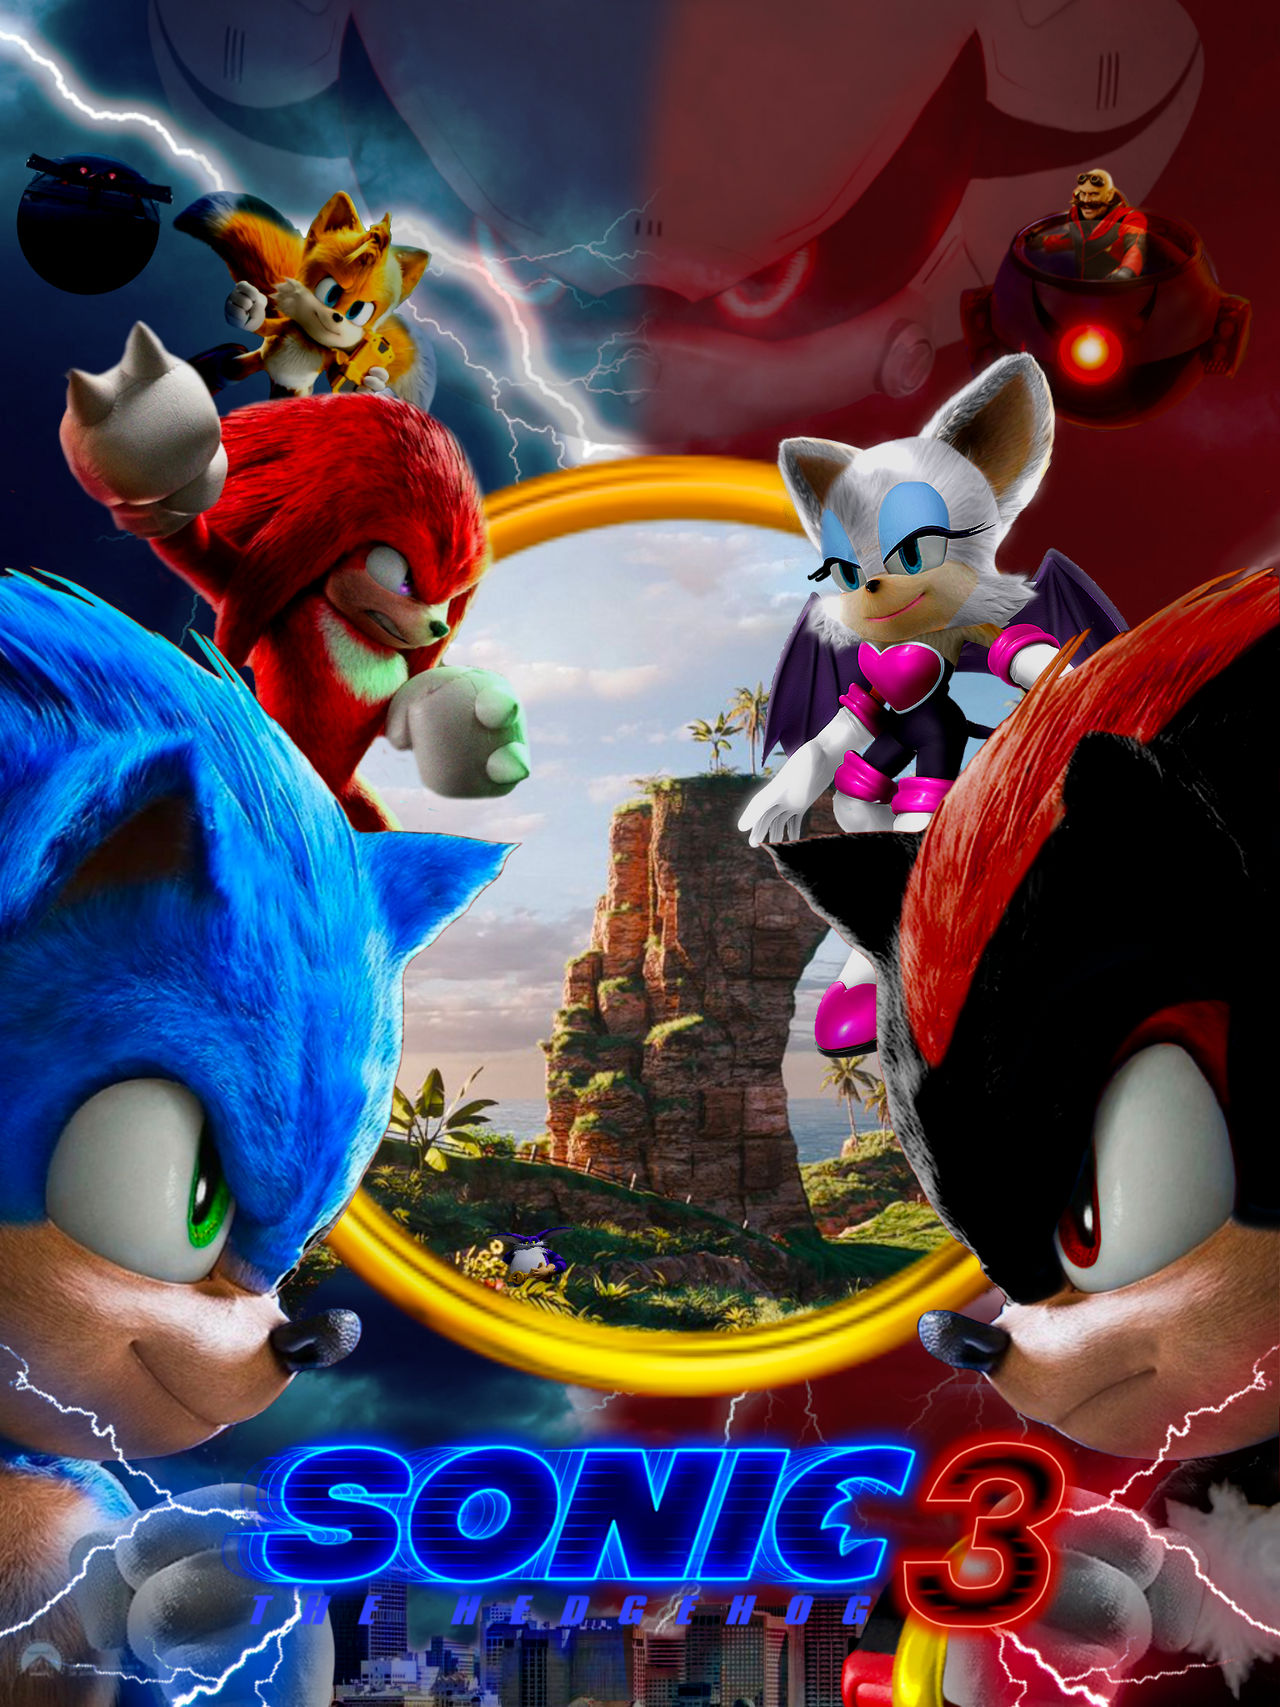 Sonic The Hedgehog 2 Movie Poster - Modern Style - by Nibroc-Rock on  DeviantArt